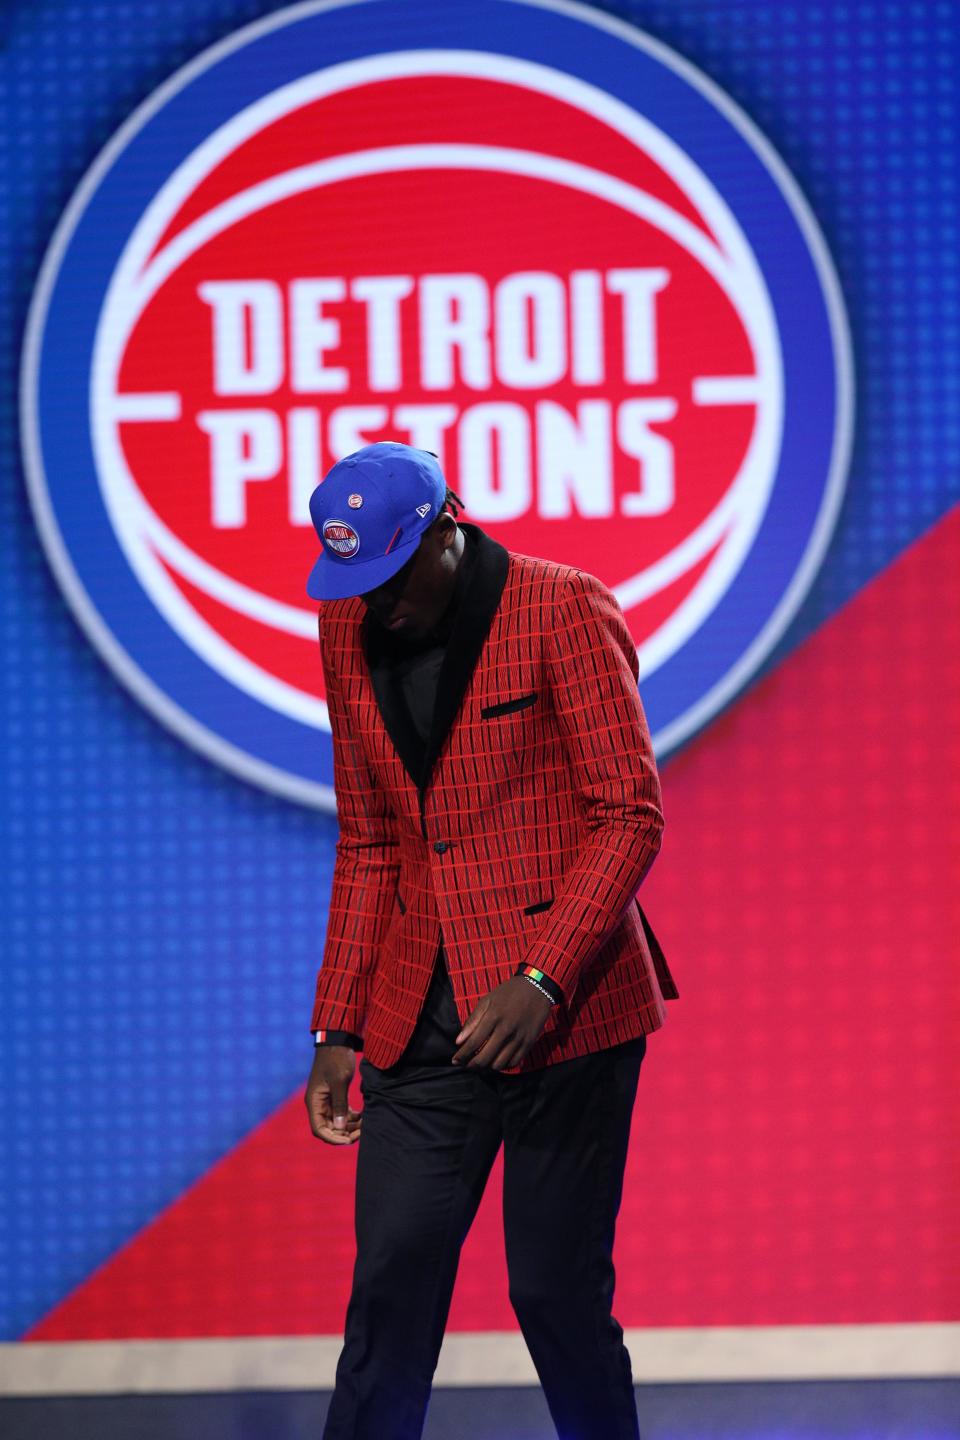 Sekou Doumbouya (Guinea) walks off the stage after being selected as the 15 overall pick by the Detroit Pistons in the first round at Barclays Center in Brooklyn, N.Y. on June 20, 2019.